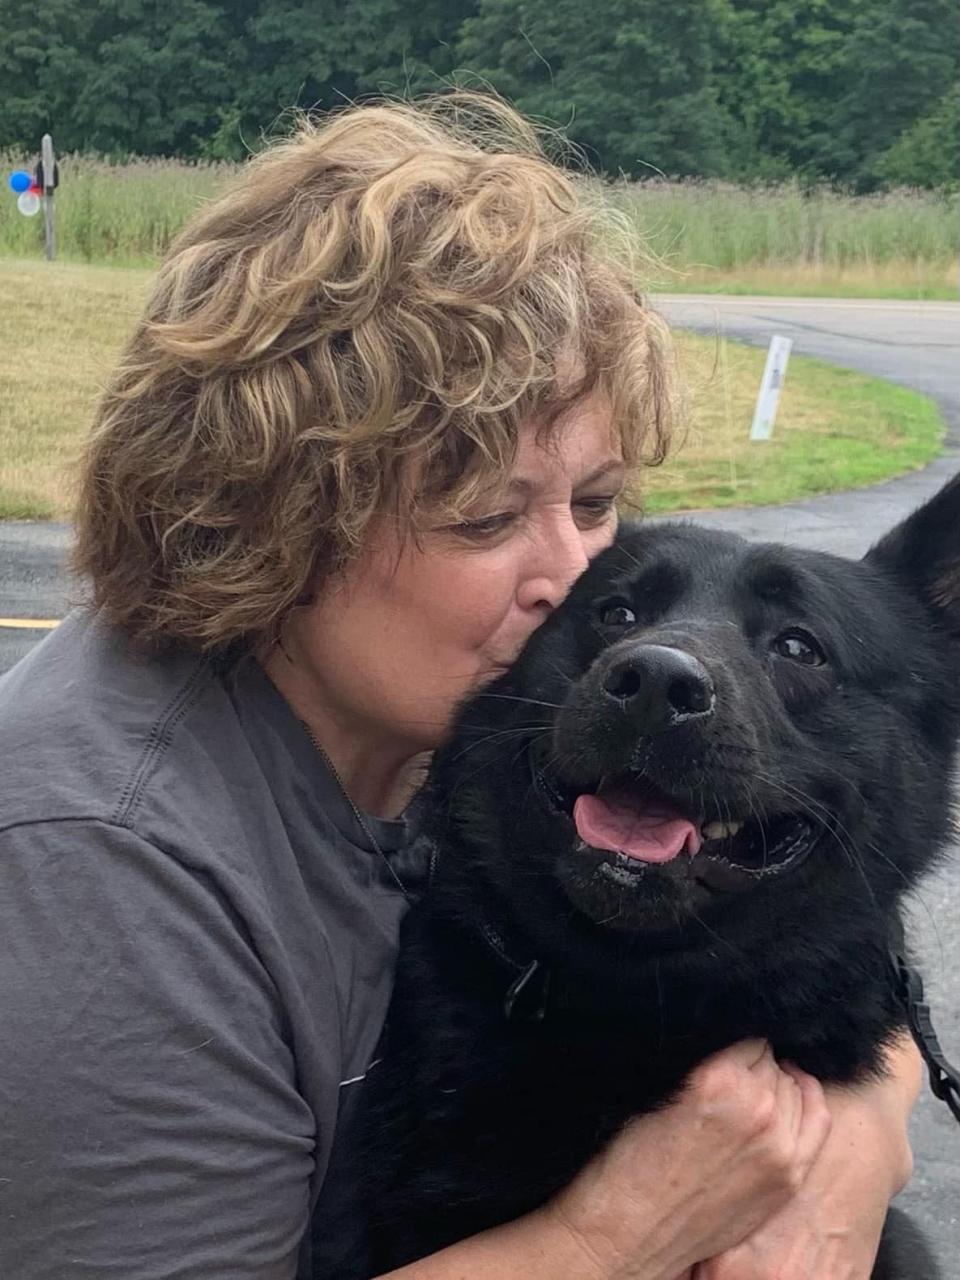 Alliance Police Department's newest K9 officer, Xander, who is partnered with Officer Anthony Palozzi, was a popular visitor at County Line Veterinary Services' open house on Saturday, July 19, 2022. The event at the Homeworth facility helped to mark its 30th anniversary.